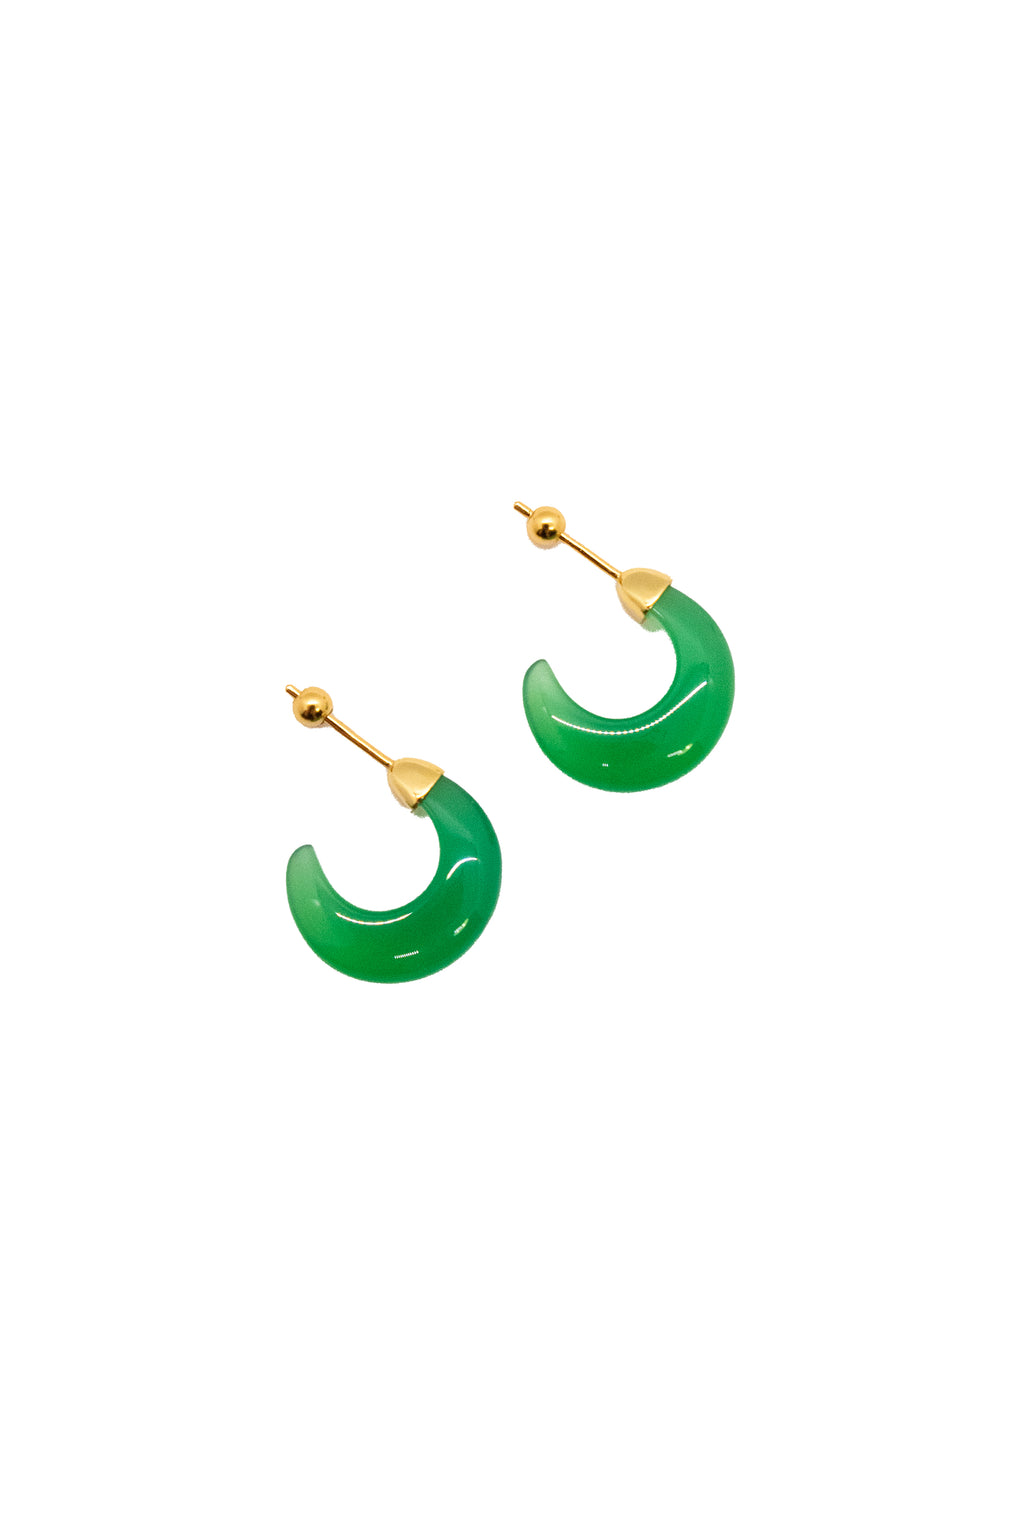 seree-half-moon-chalcedony-earrings-with-gold-plated-sterling-silver-1